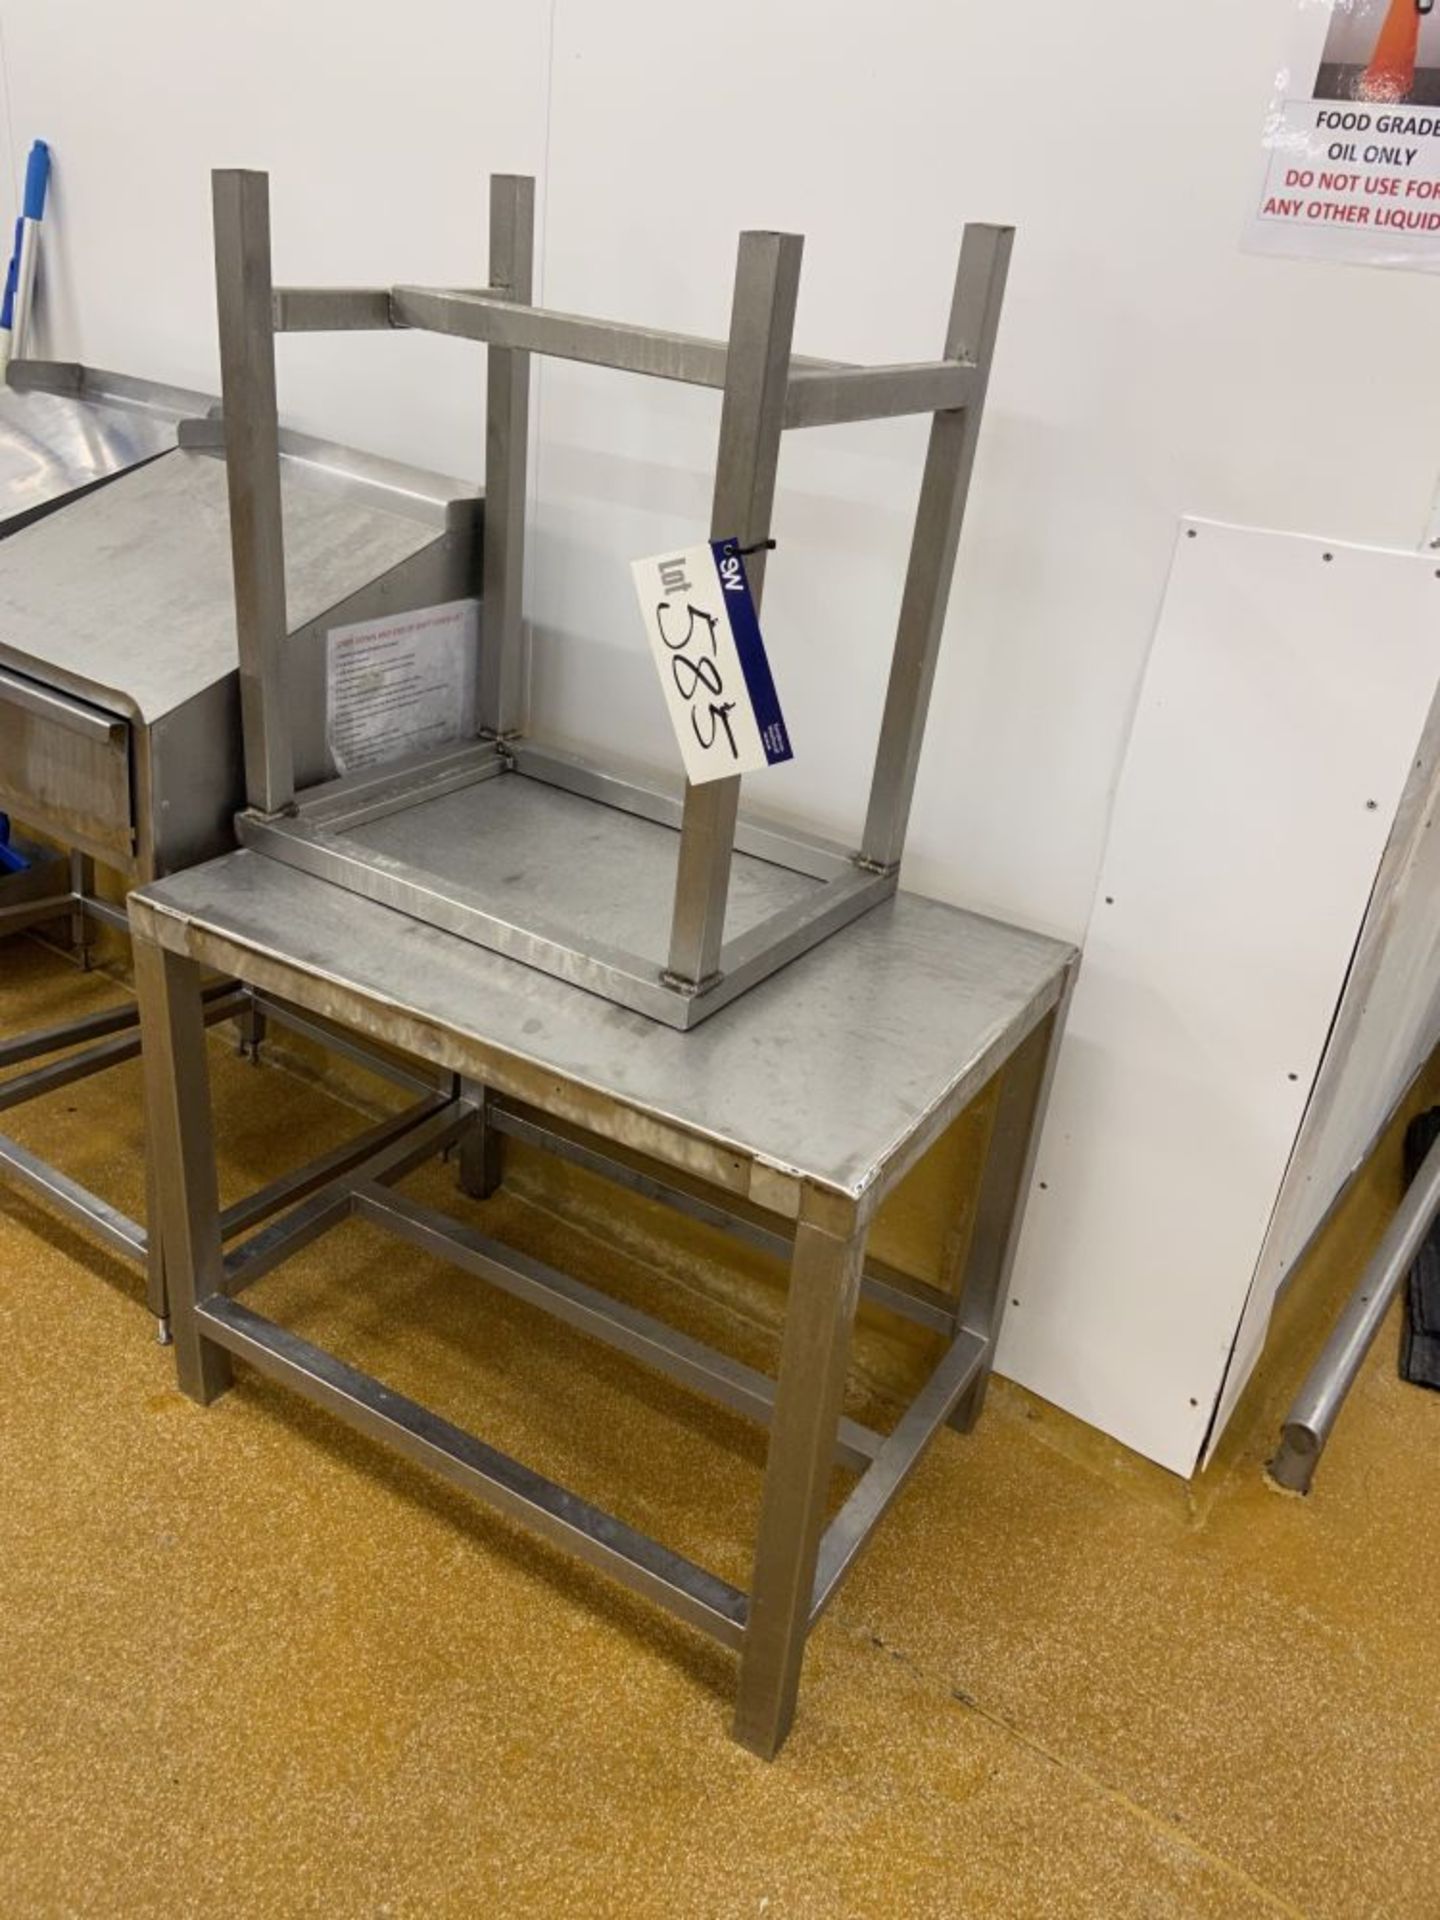 Two Stainless Steel Benches, one approx. 900mm x 600mm and one approx. 660mm x 460mmPlease read